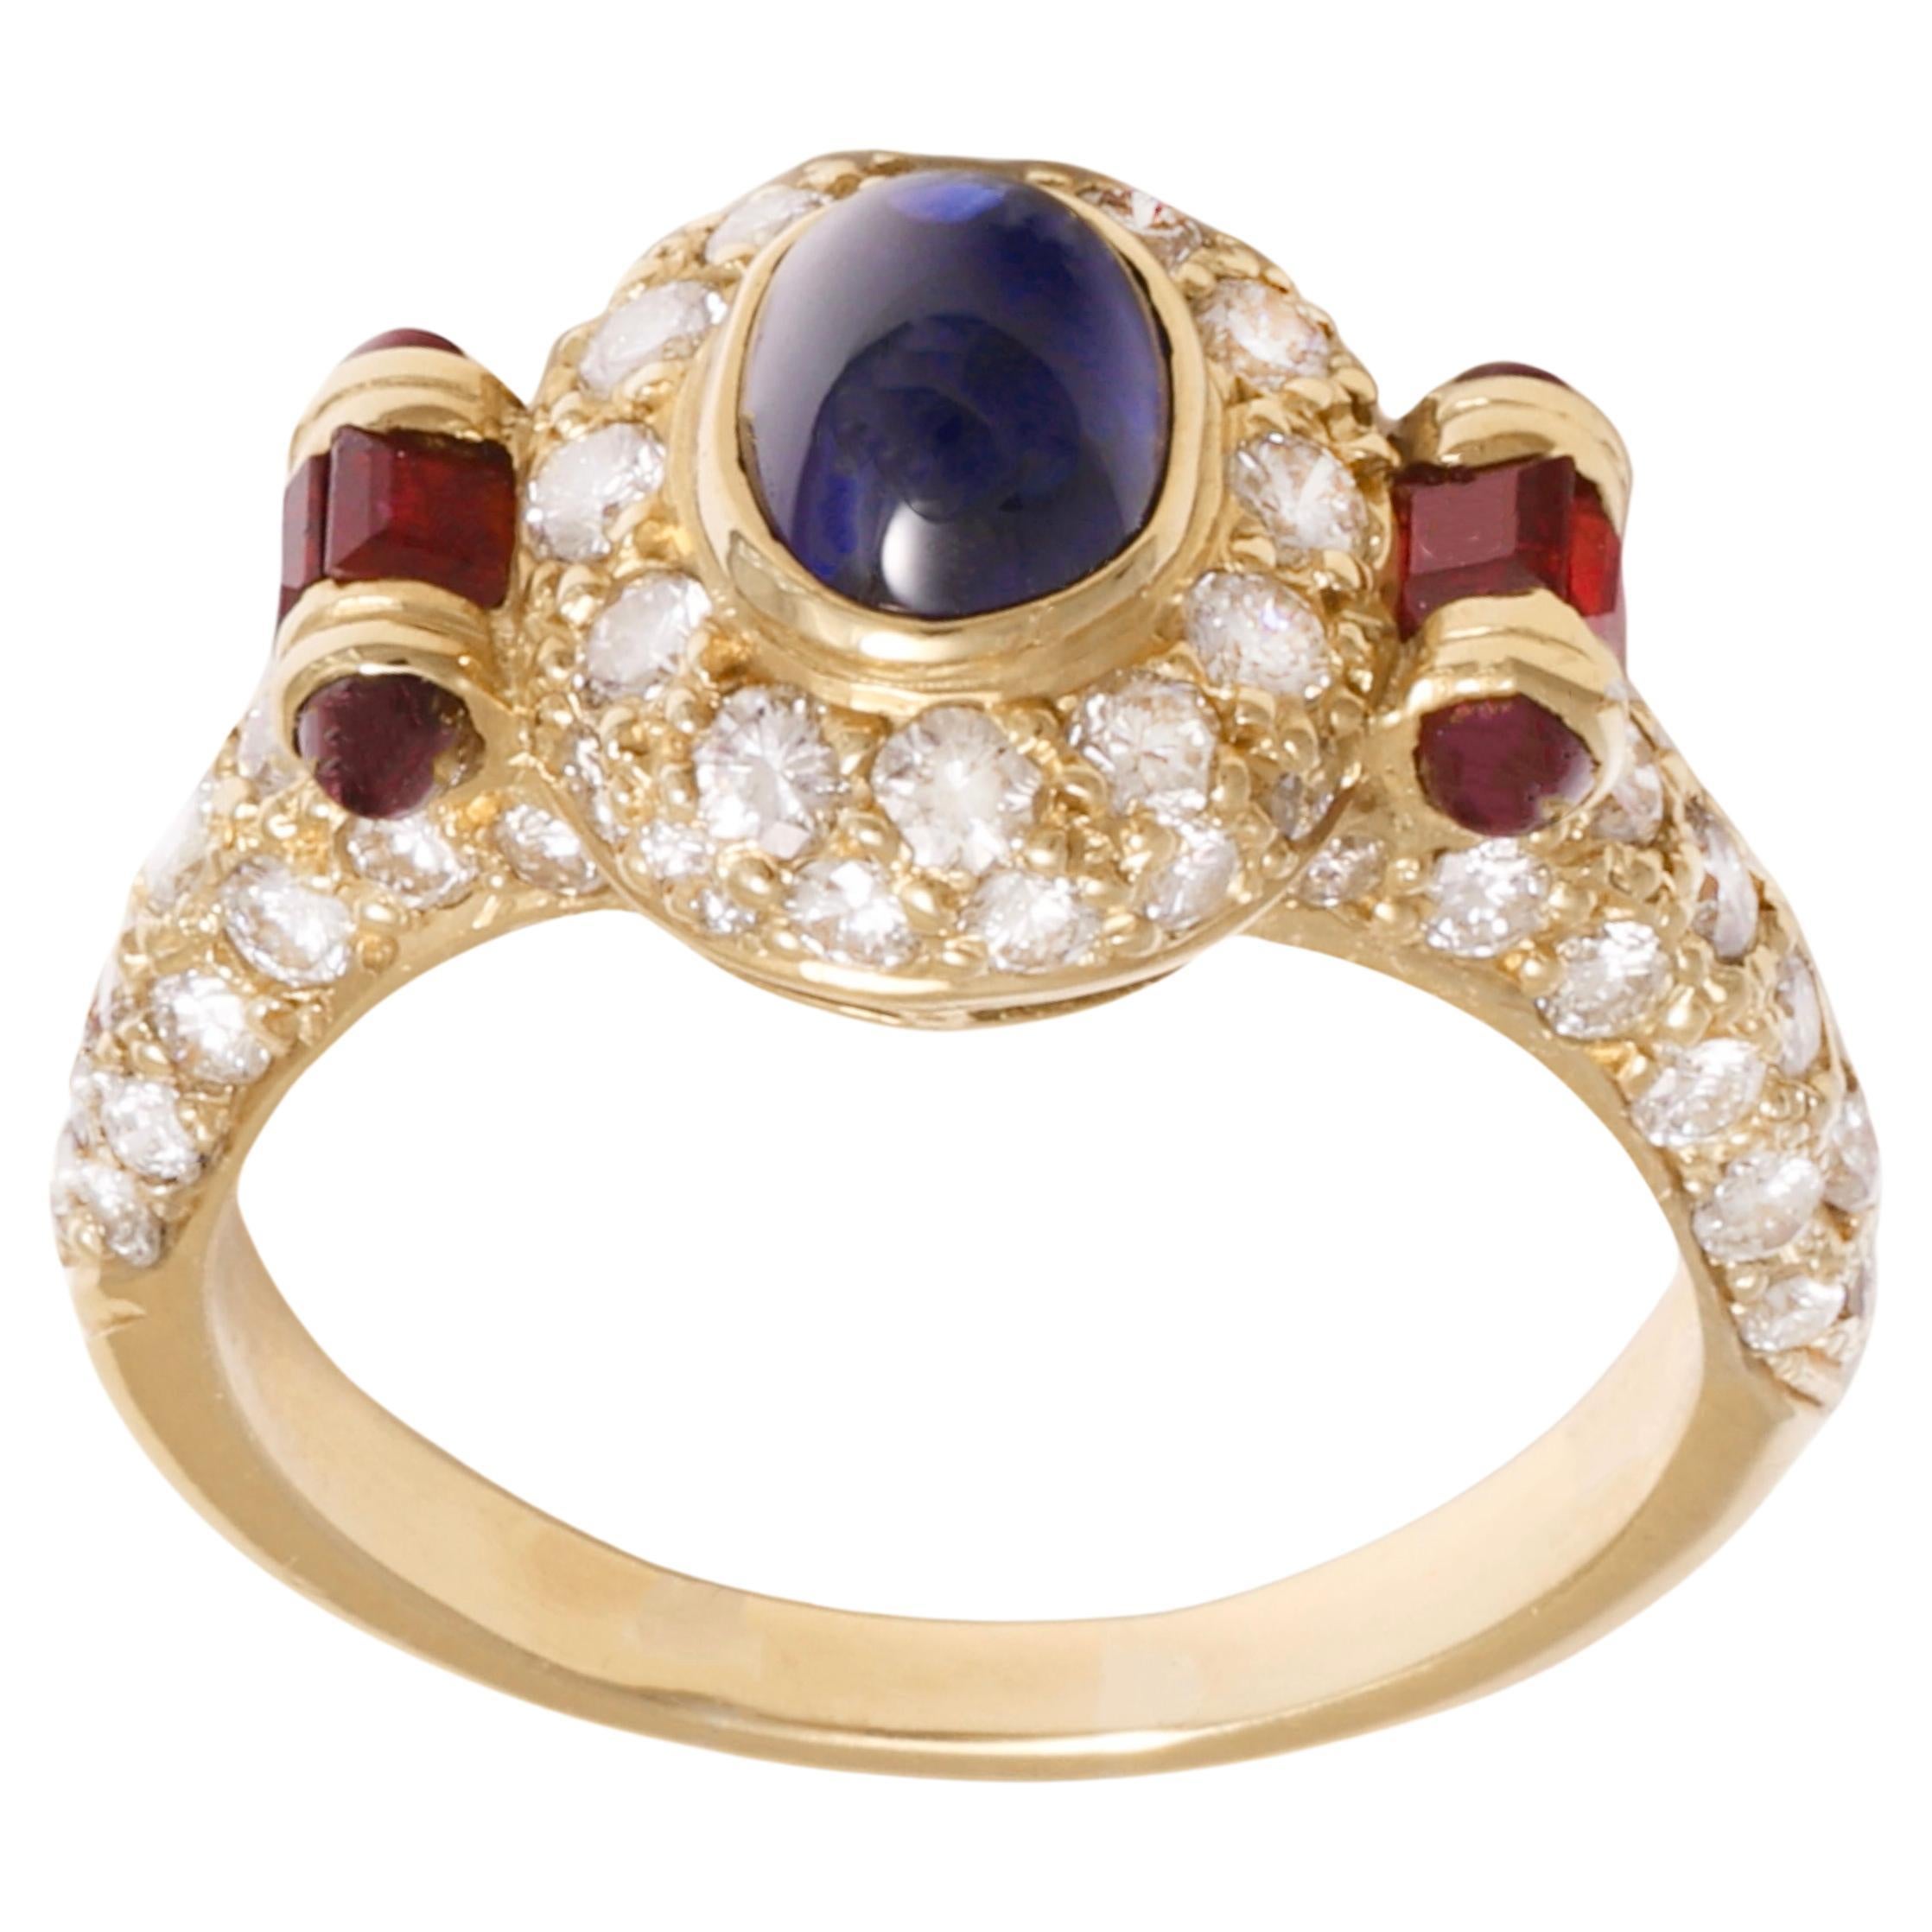  18 kt. Gold Ring With 1.20 ct. Cabochon Sapphire & Ruby & Diamond